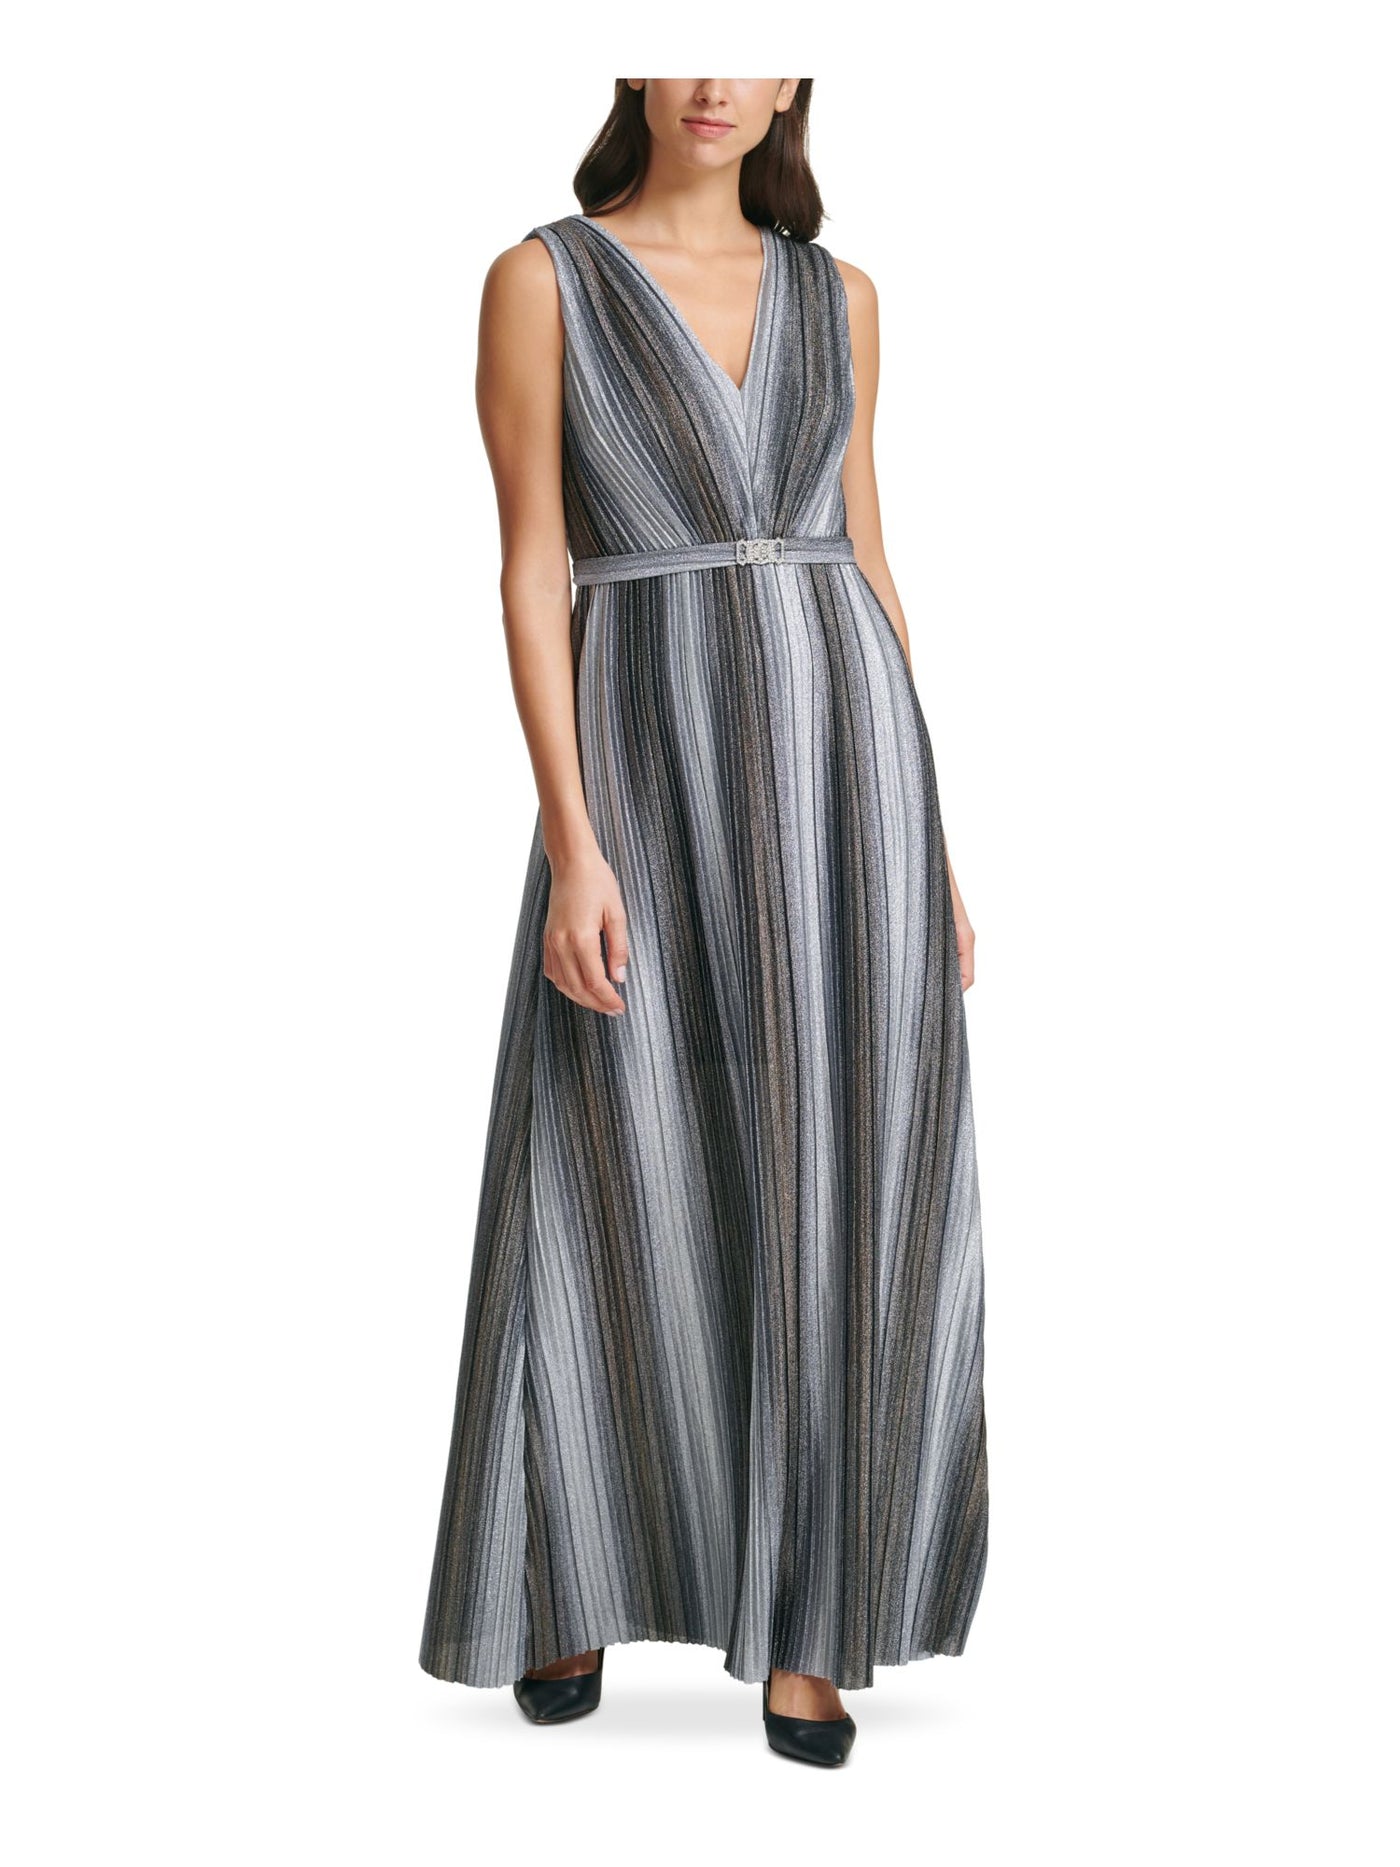 VINCE CAMUTO Womens Gray Glitter Belted Striped Sleeveless V Neck Full-Length Evening Fit + Flare Dress 10